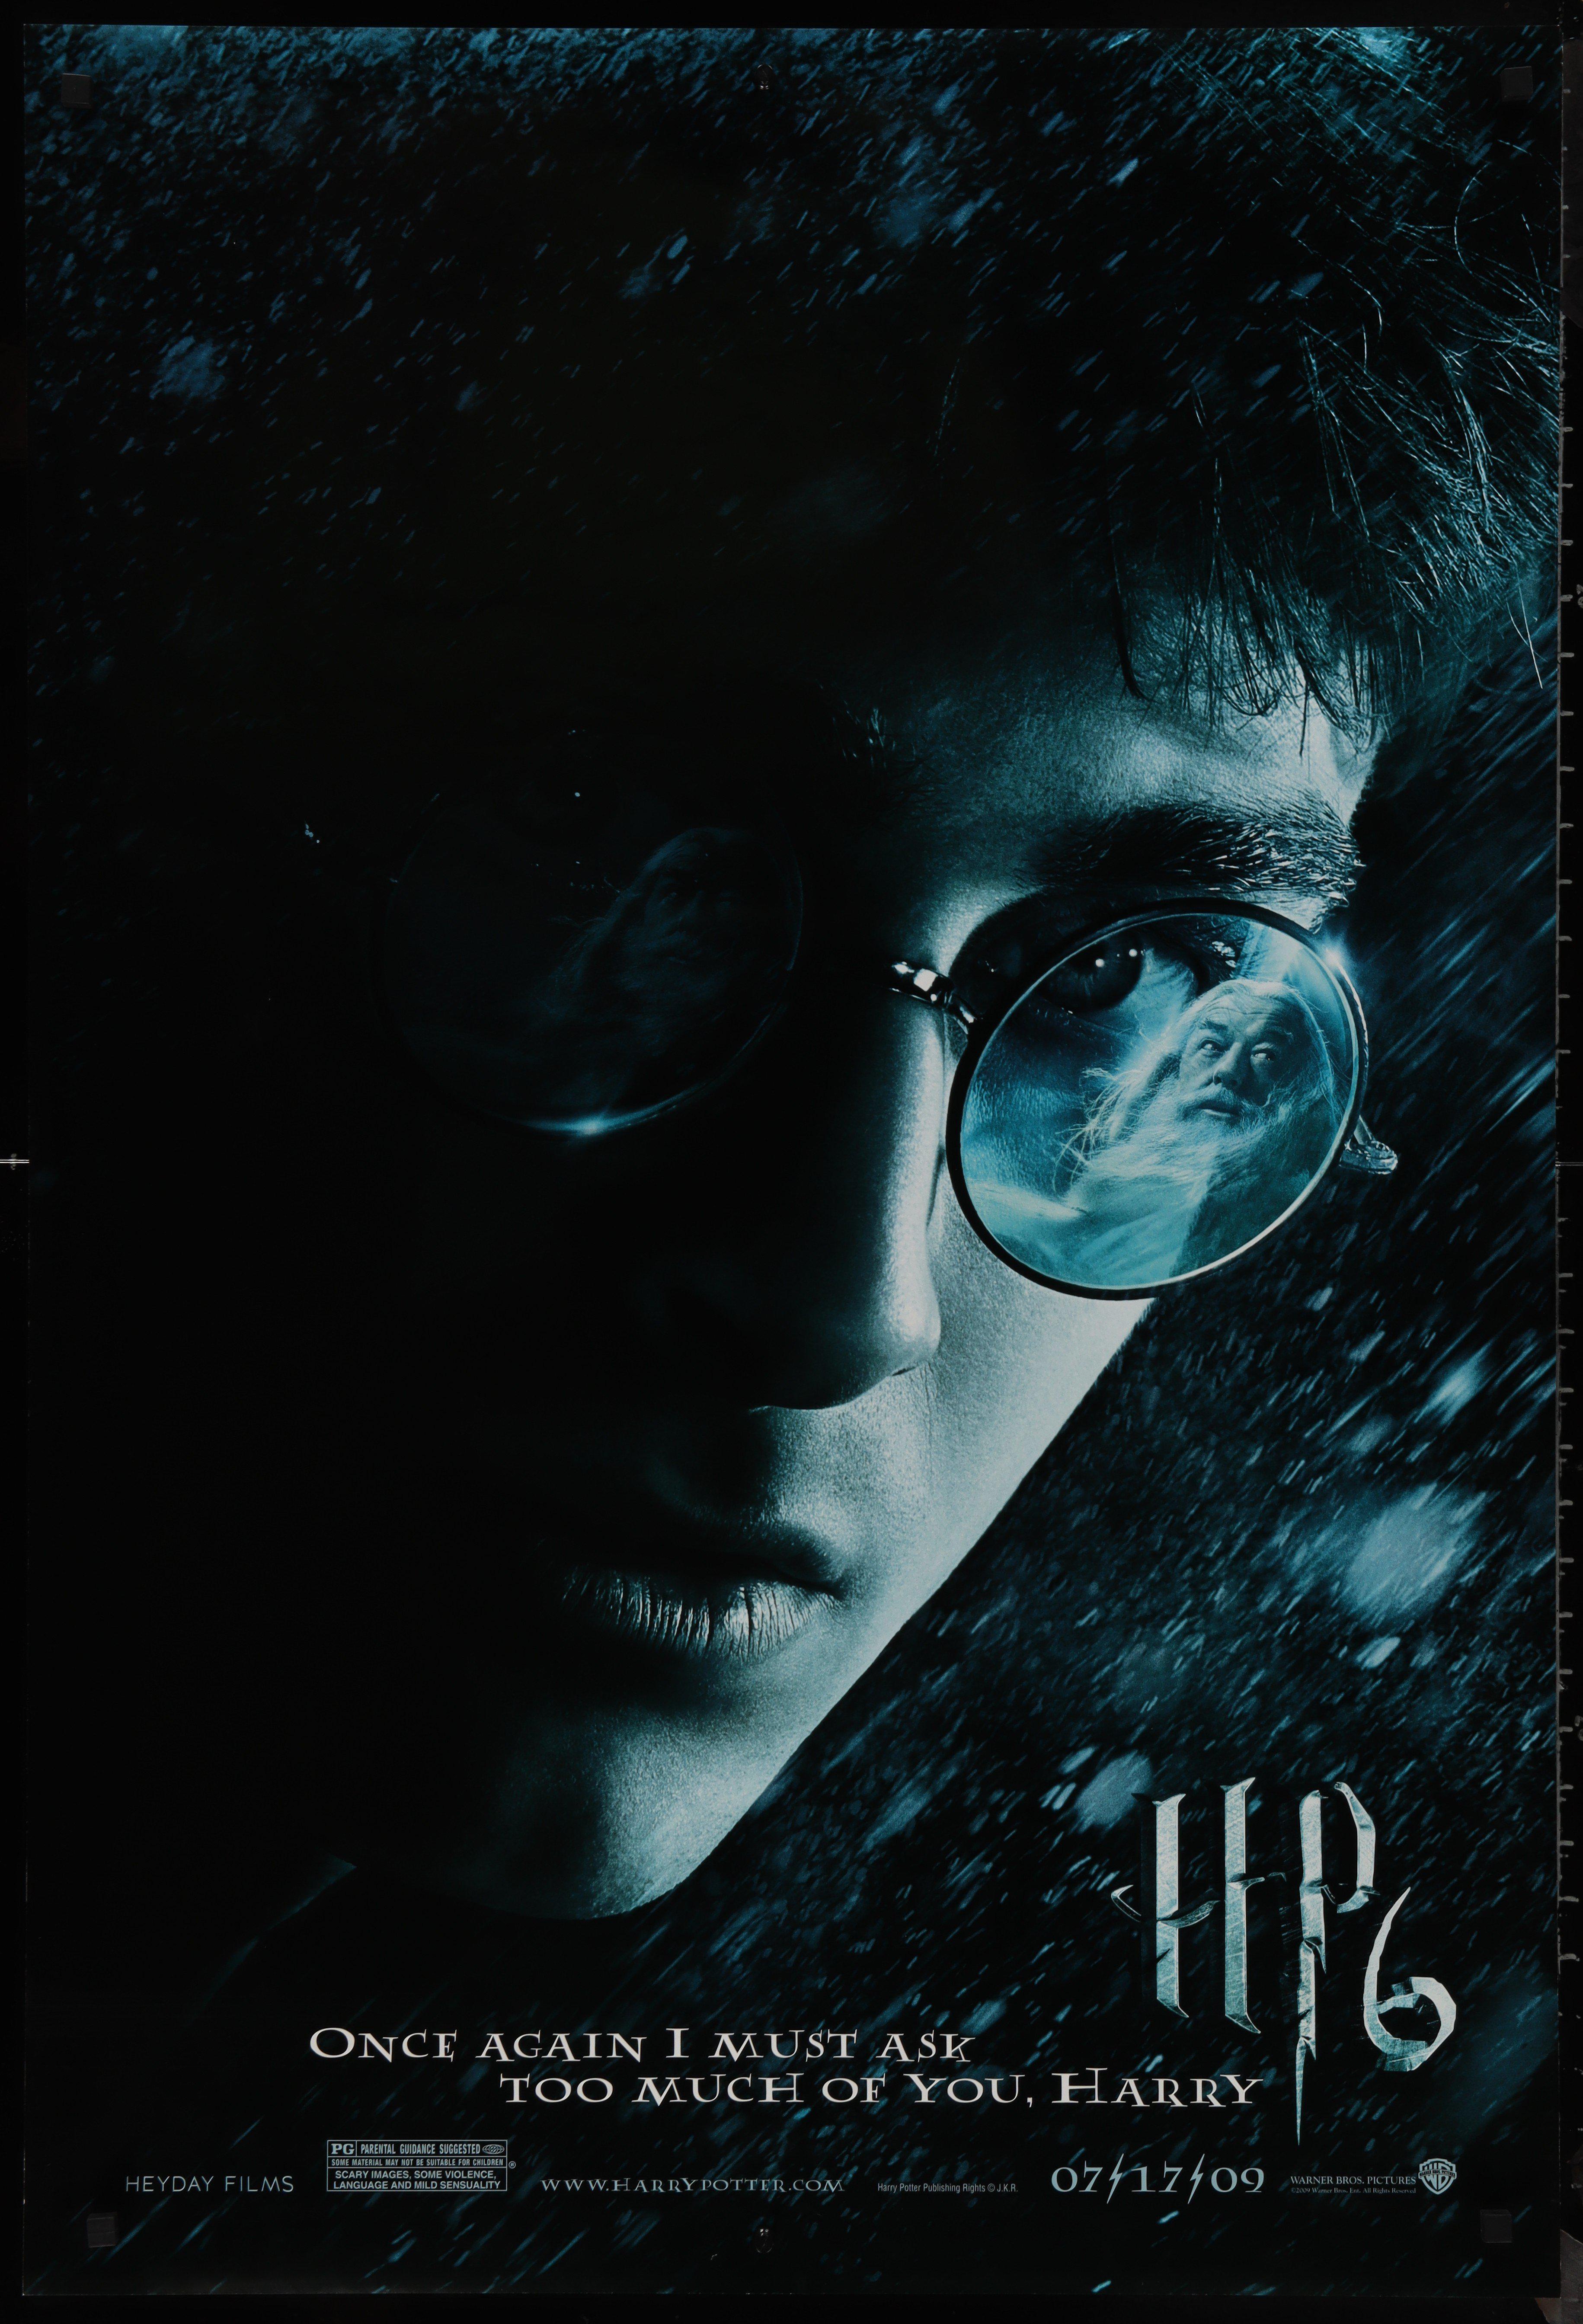 Harry Potter And The Sorcerer's Stone - Movie Poster (Regular) (27